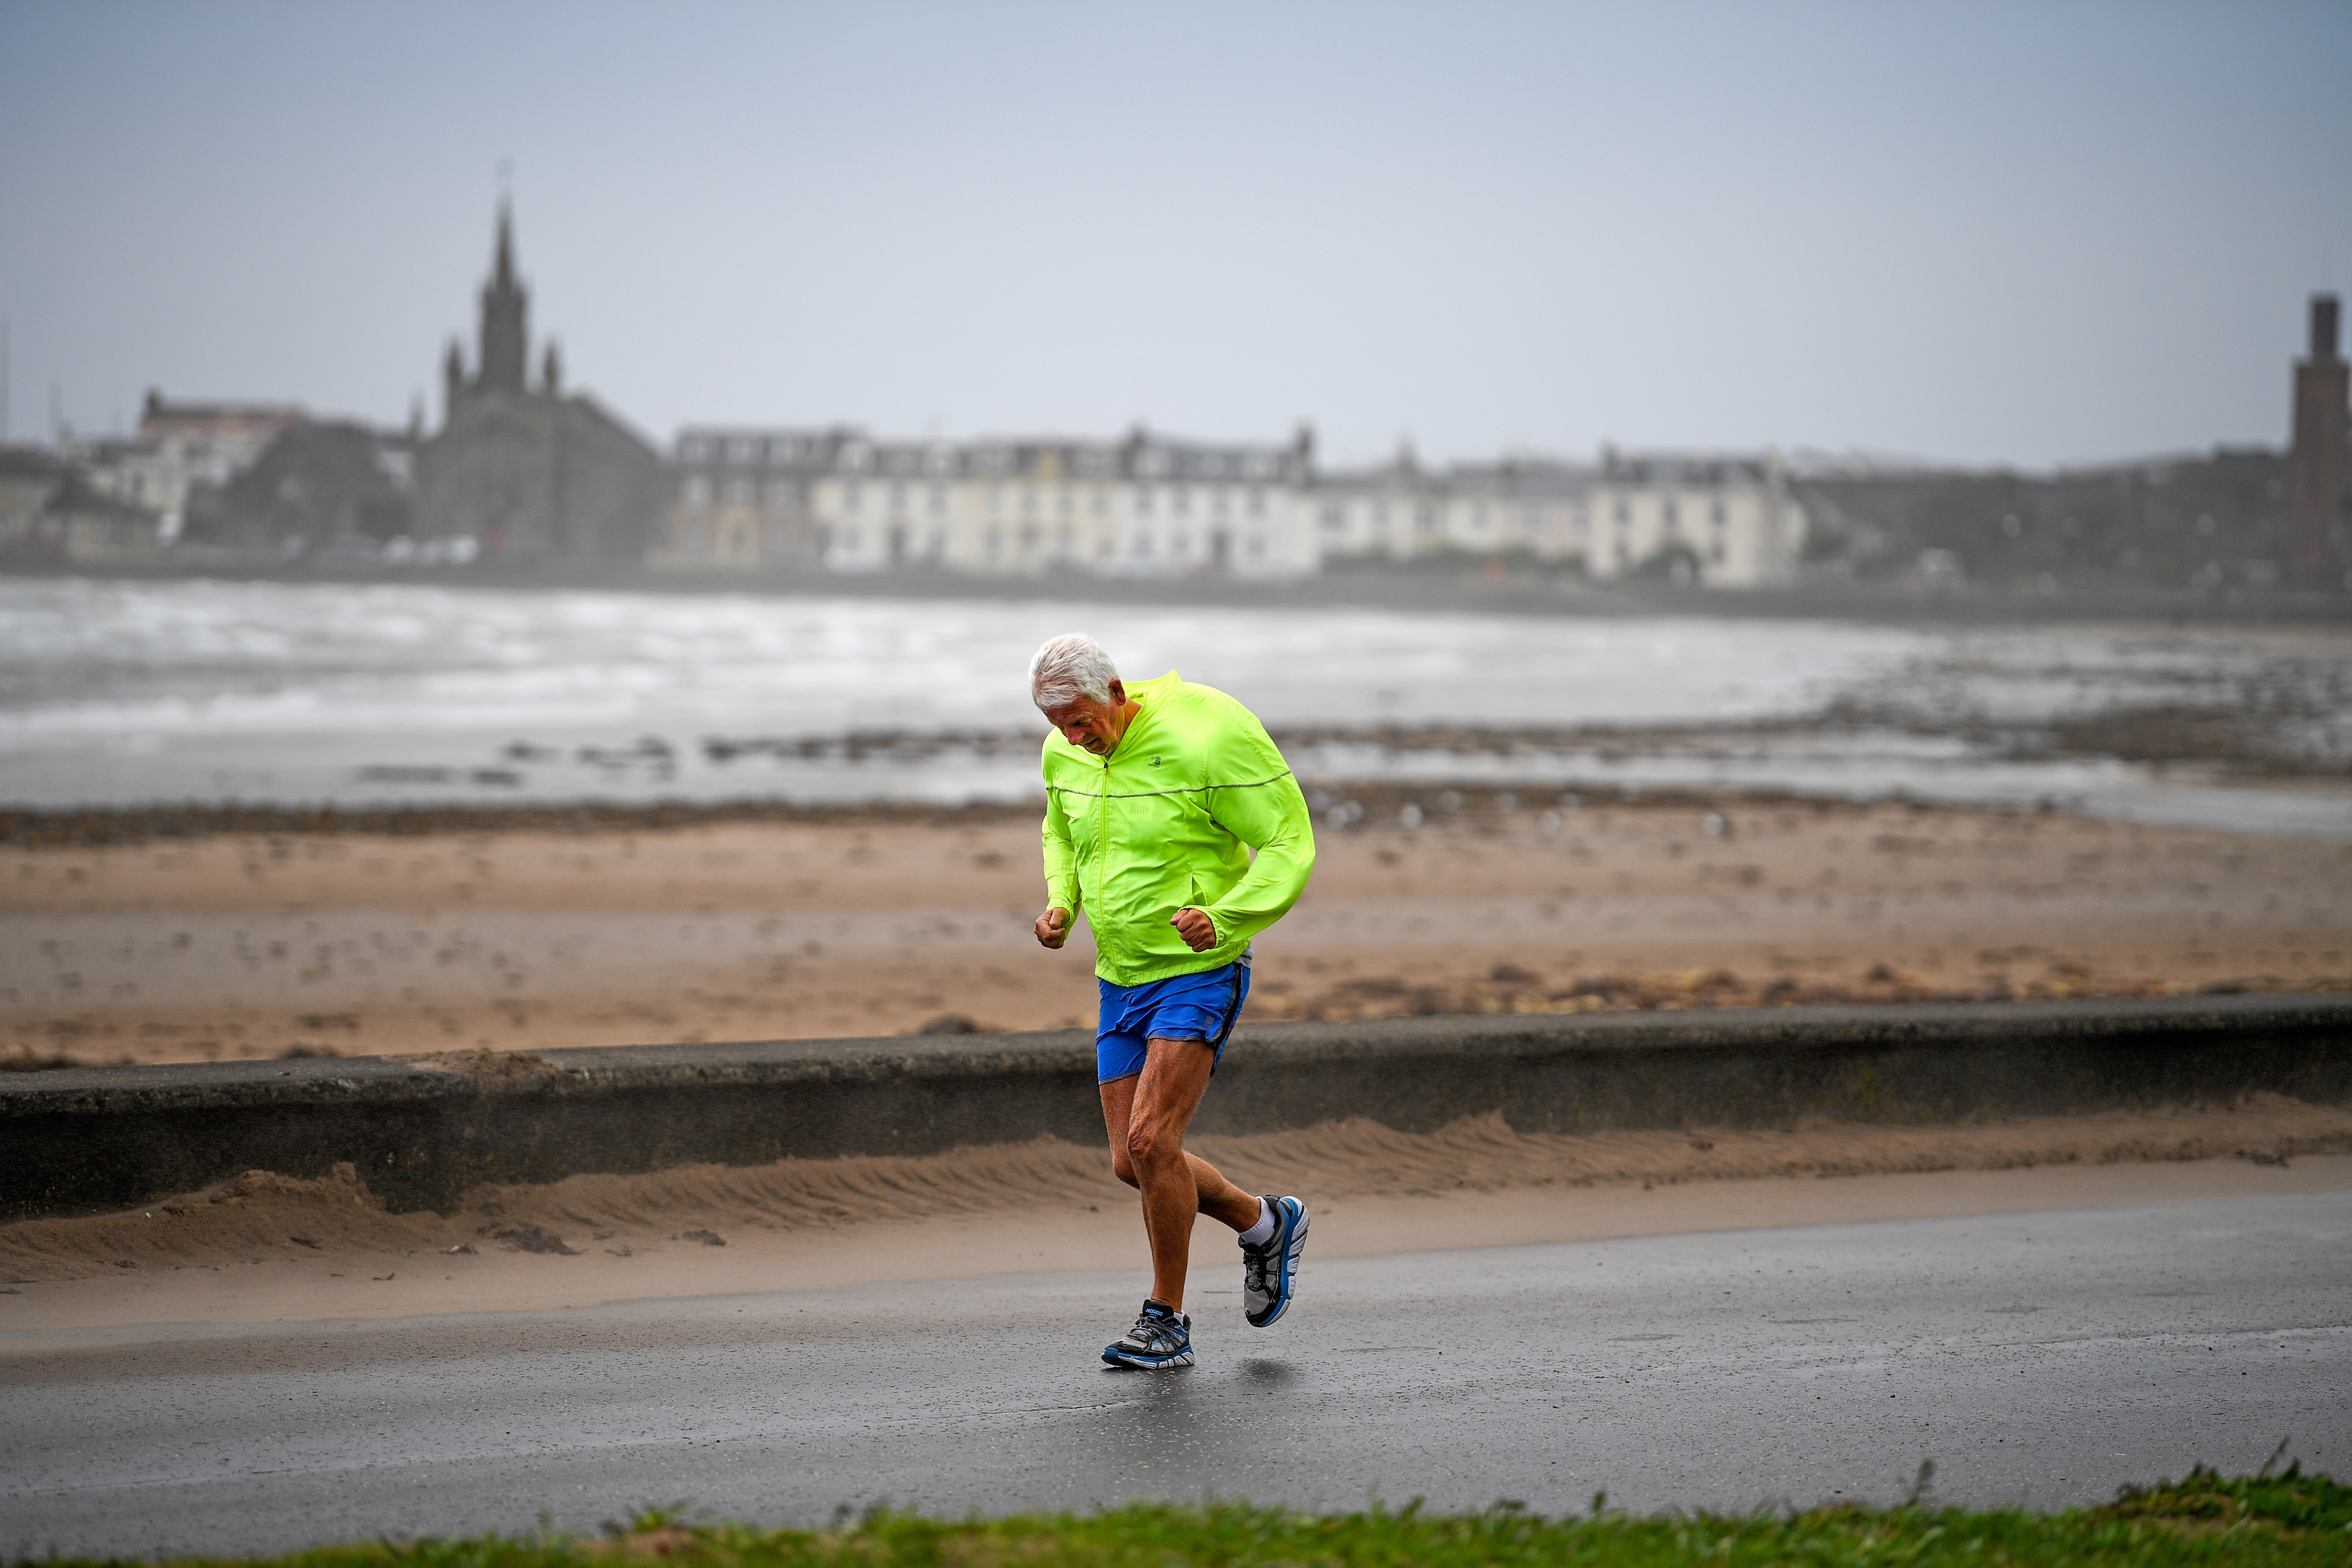 A member of the public struggles in the wind as he goes for a run as Storm Ali hits land at Saltcoats (Jeff J Mitchell/Getty Images)